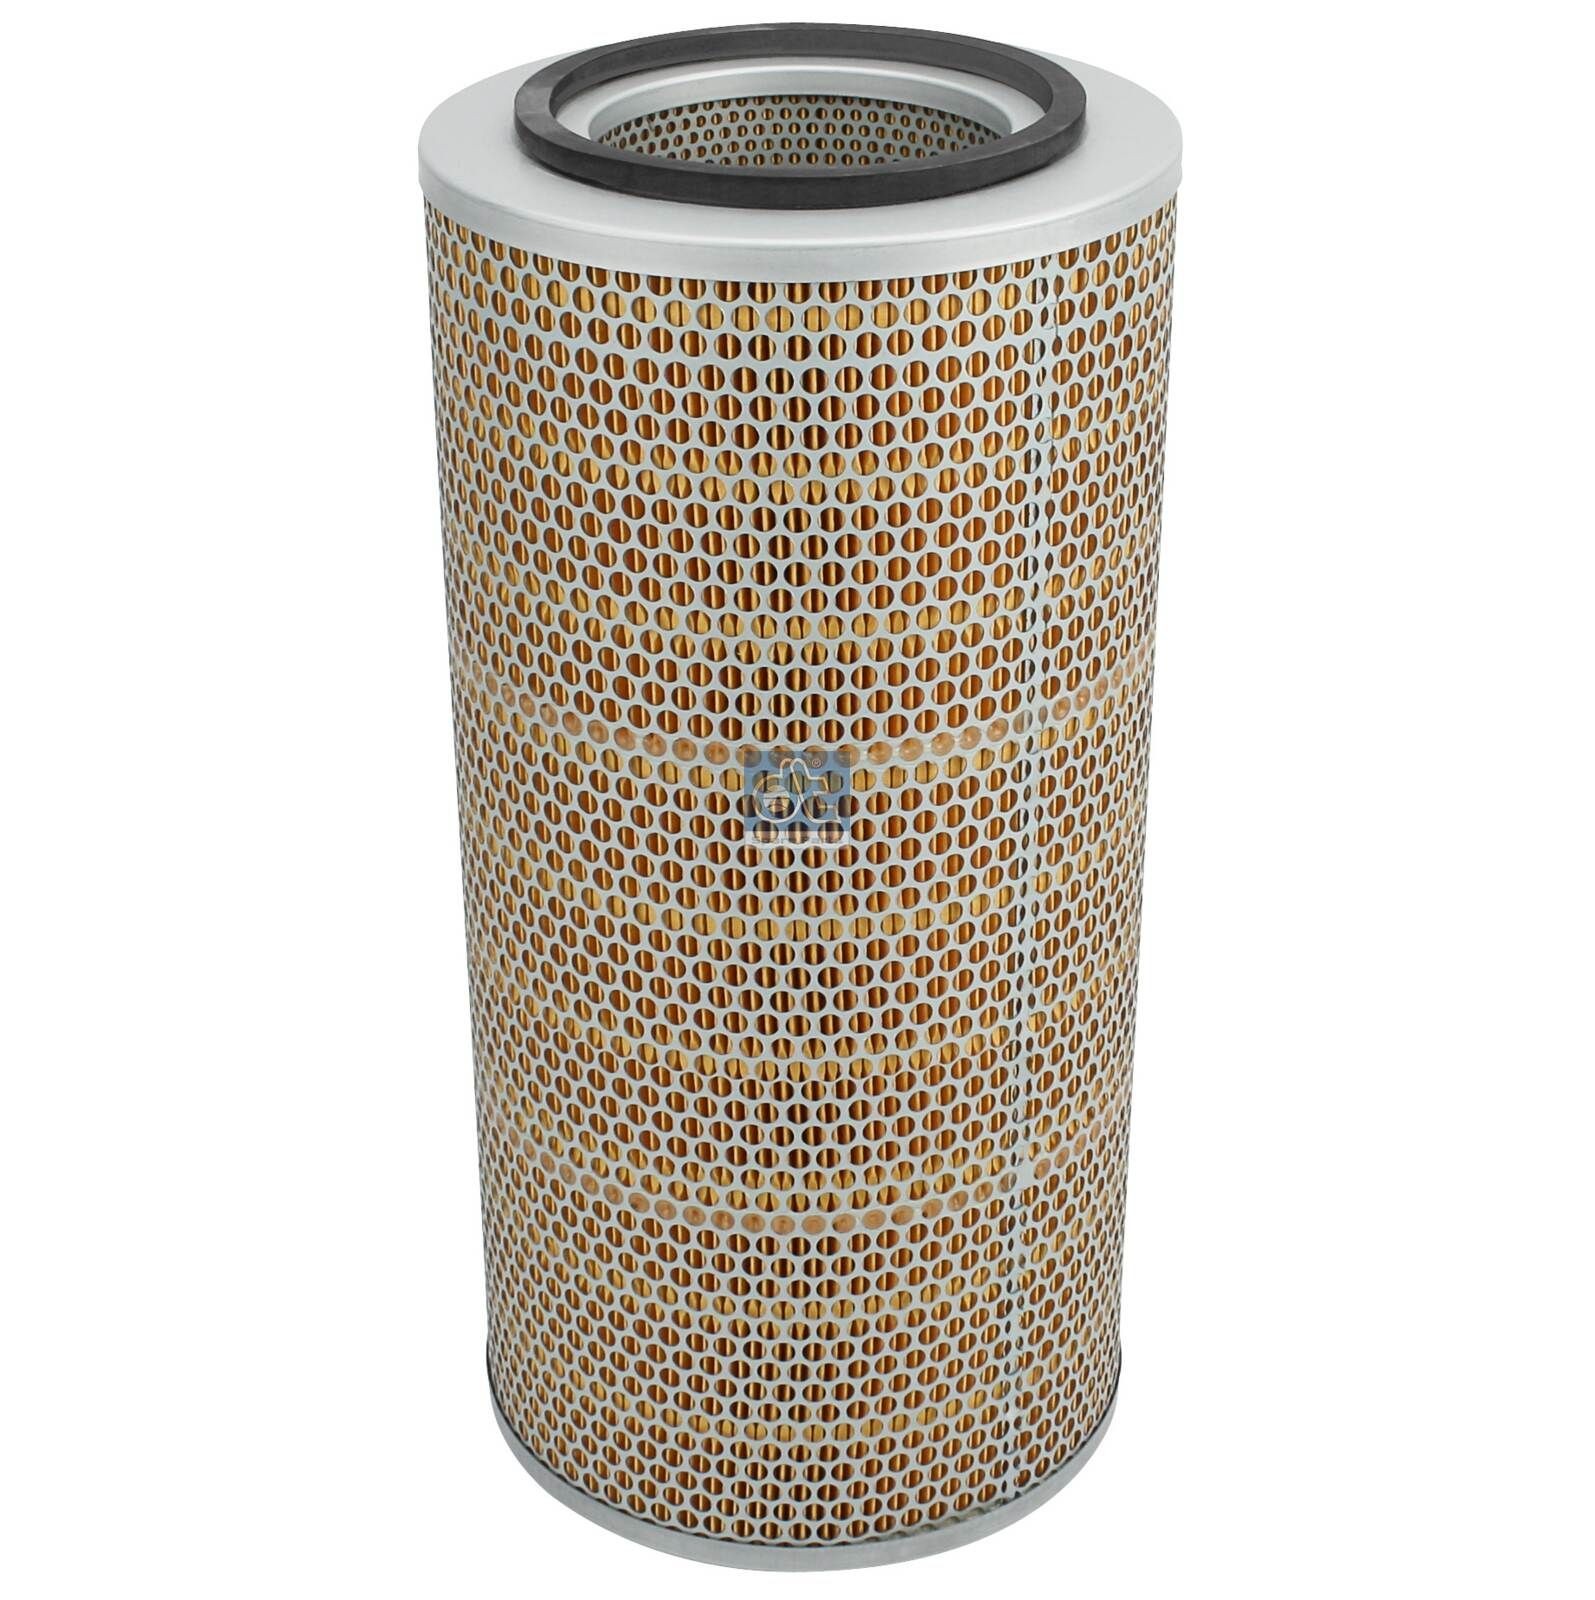 C 24 650/1 DT Spare Parts 493mm, 241mm, Filter Insert Height: 493mm Engine air filter 5.45100 buy